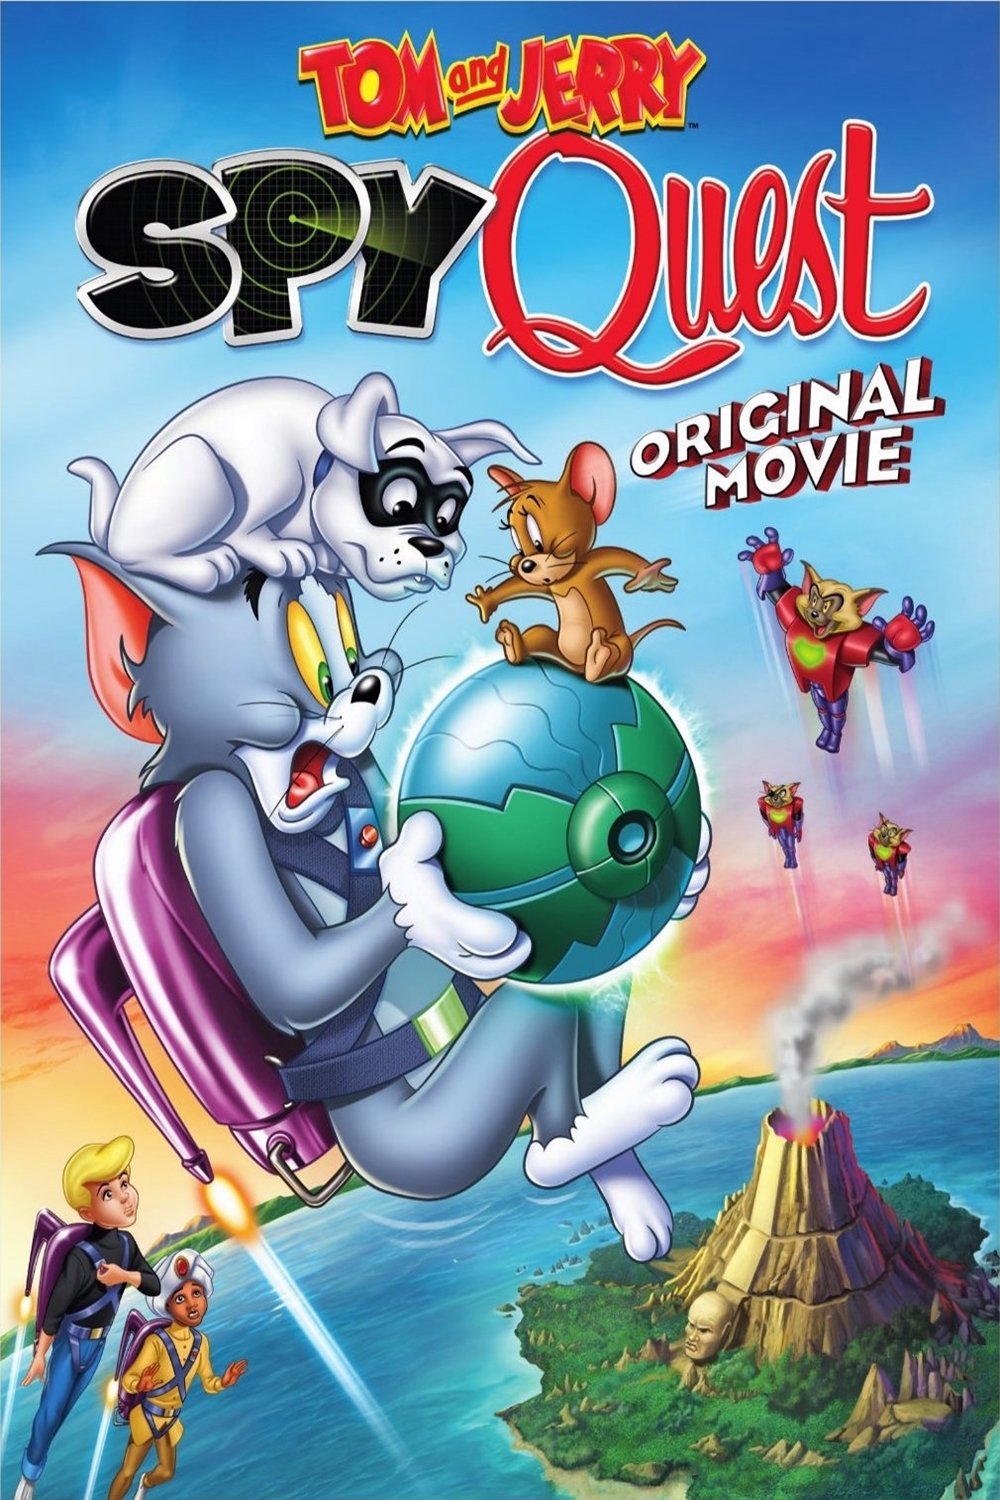 Poster for the movie "Tom and Jerry: Spy Quest"